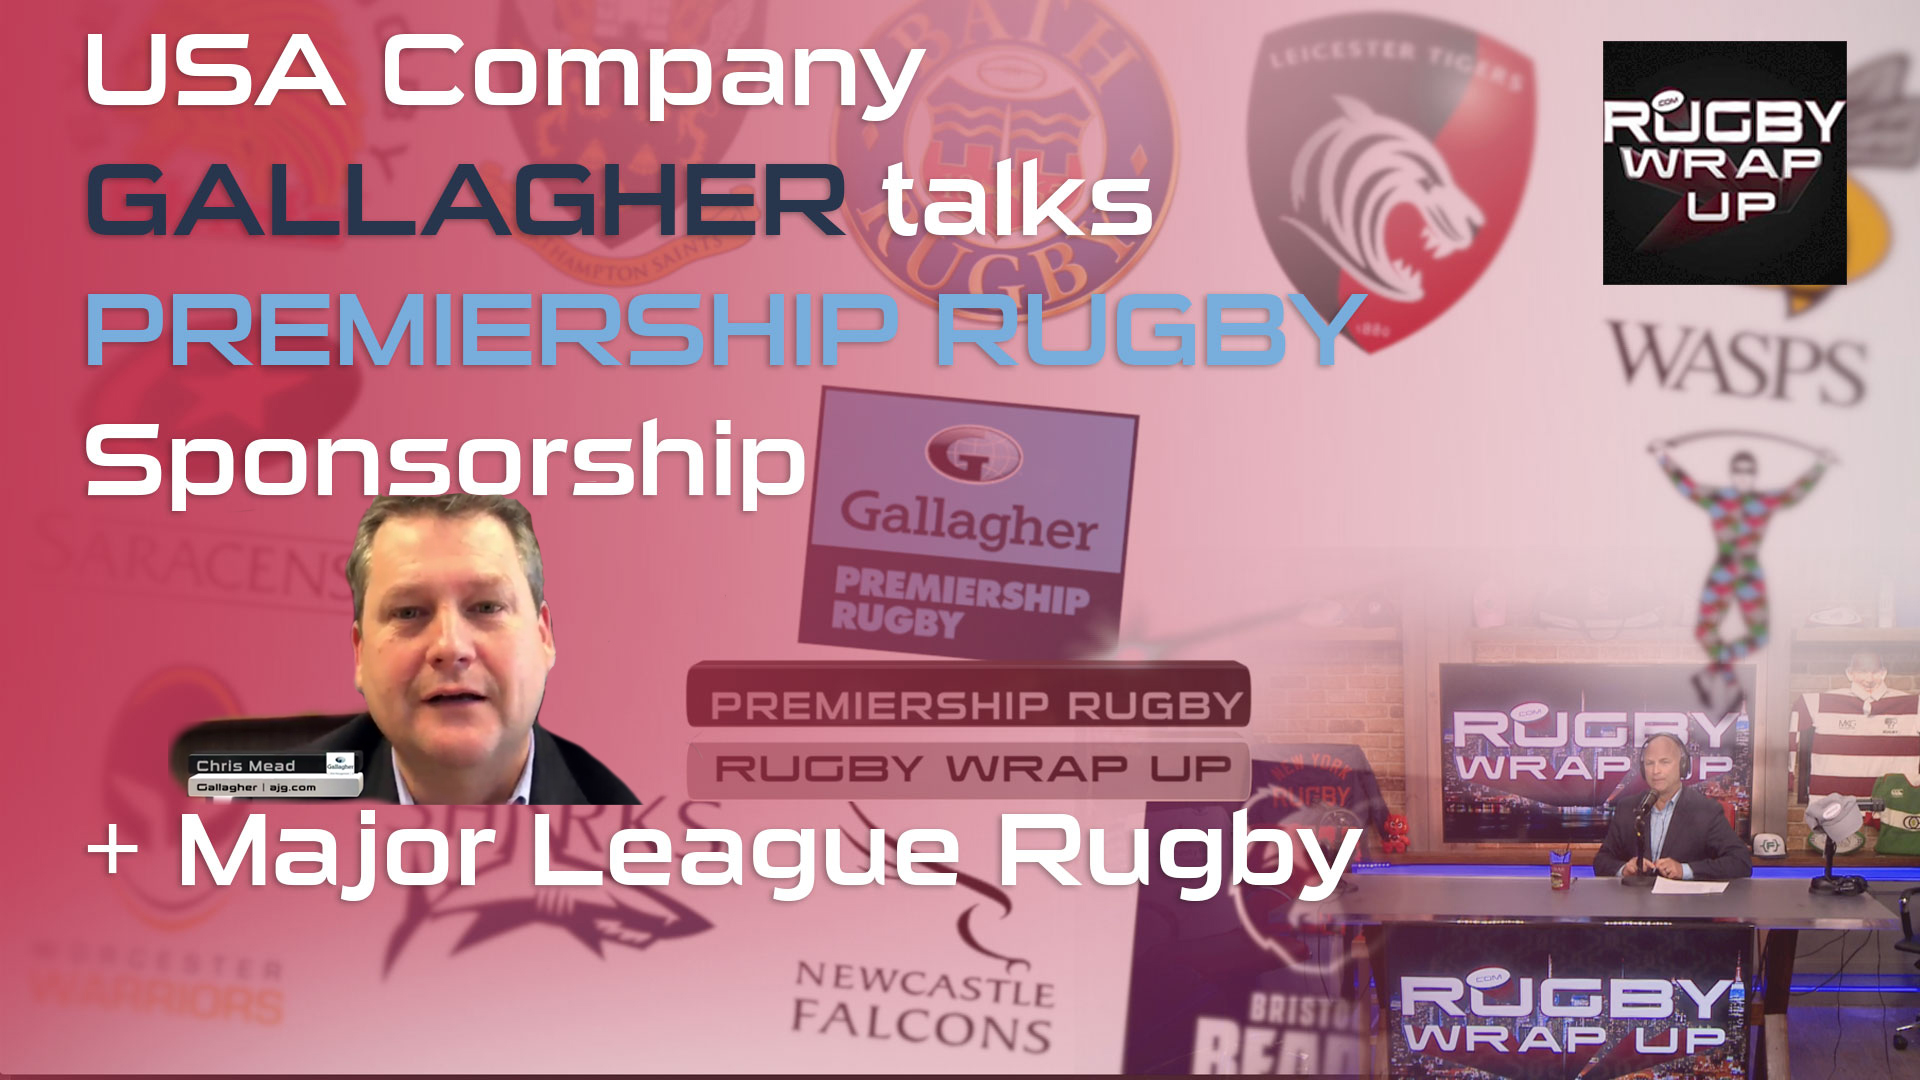 Gallagher-Premiership-Rugby-Chris-Mead-Rugby_Wrap_Up